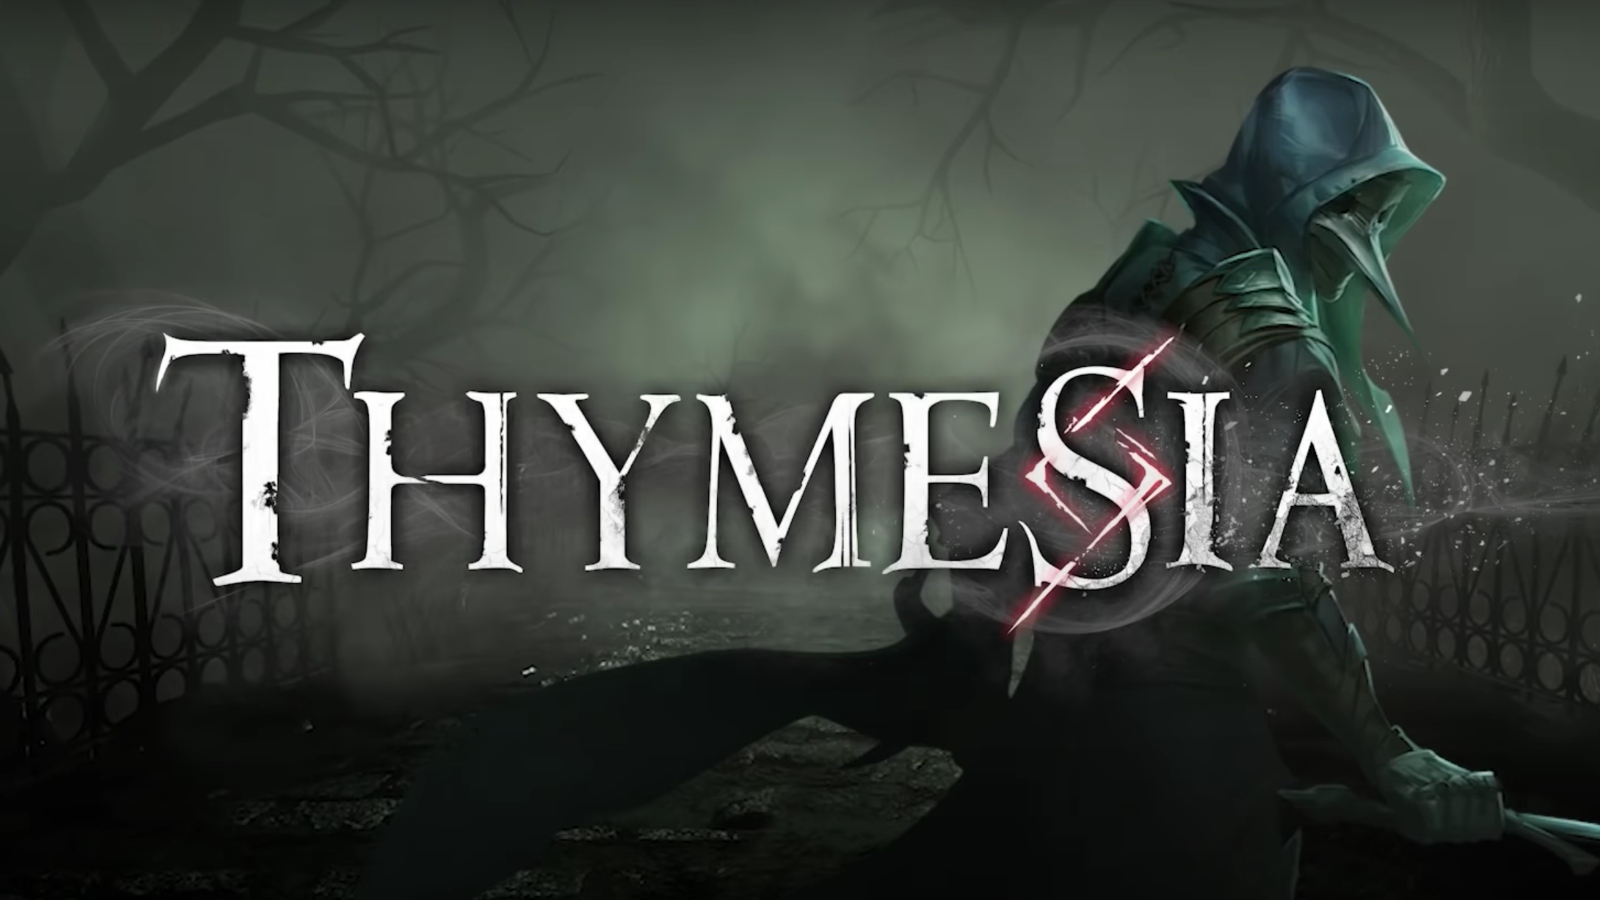 Action-RPG Thymesia To Launch In December For PC